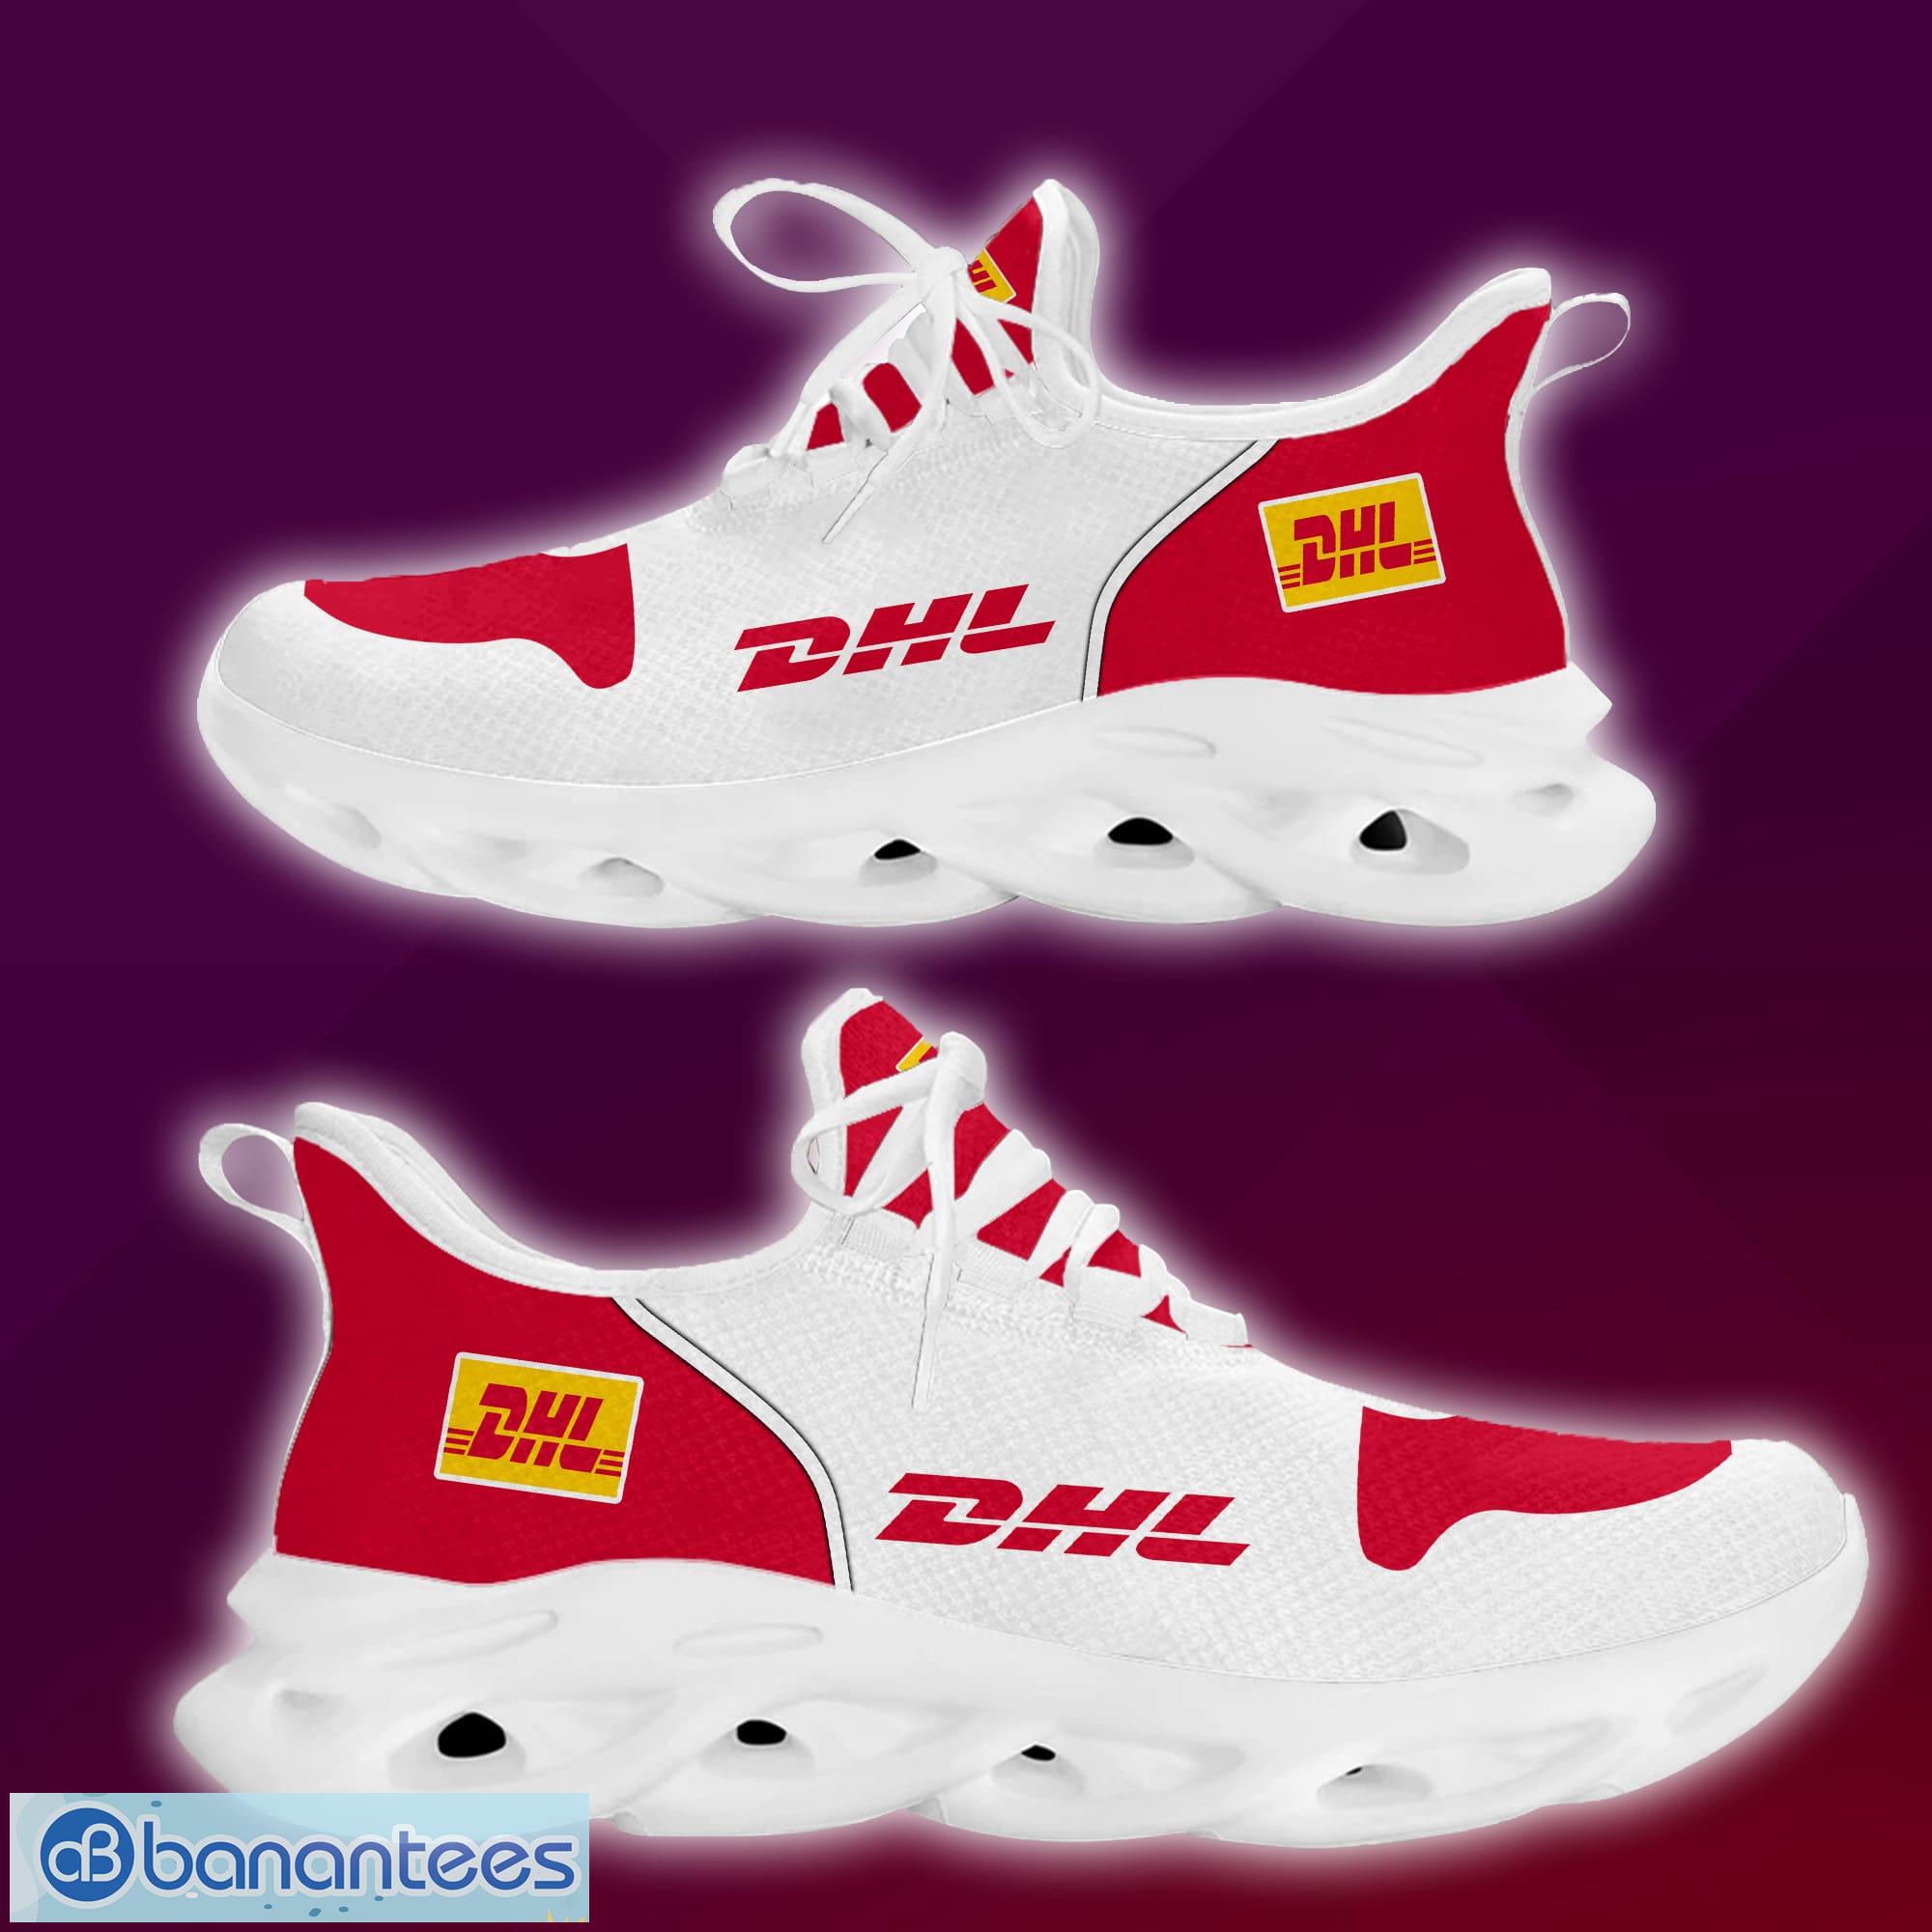 DHL sneakers go on sale | Logistics Manager